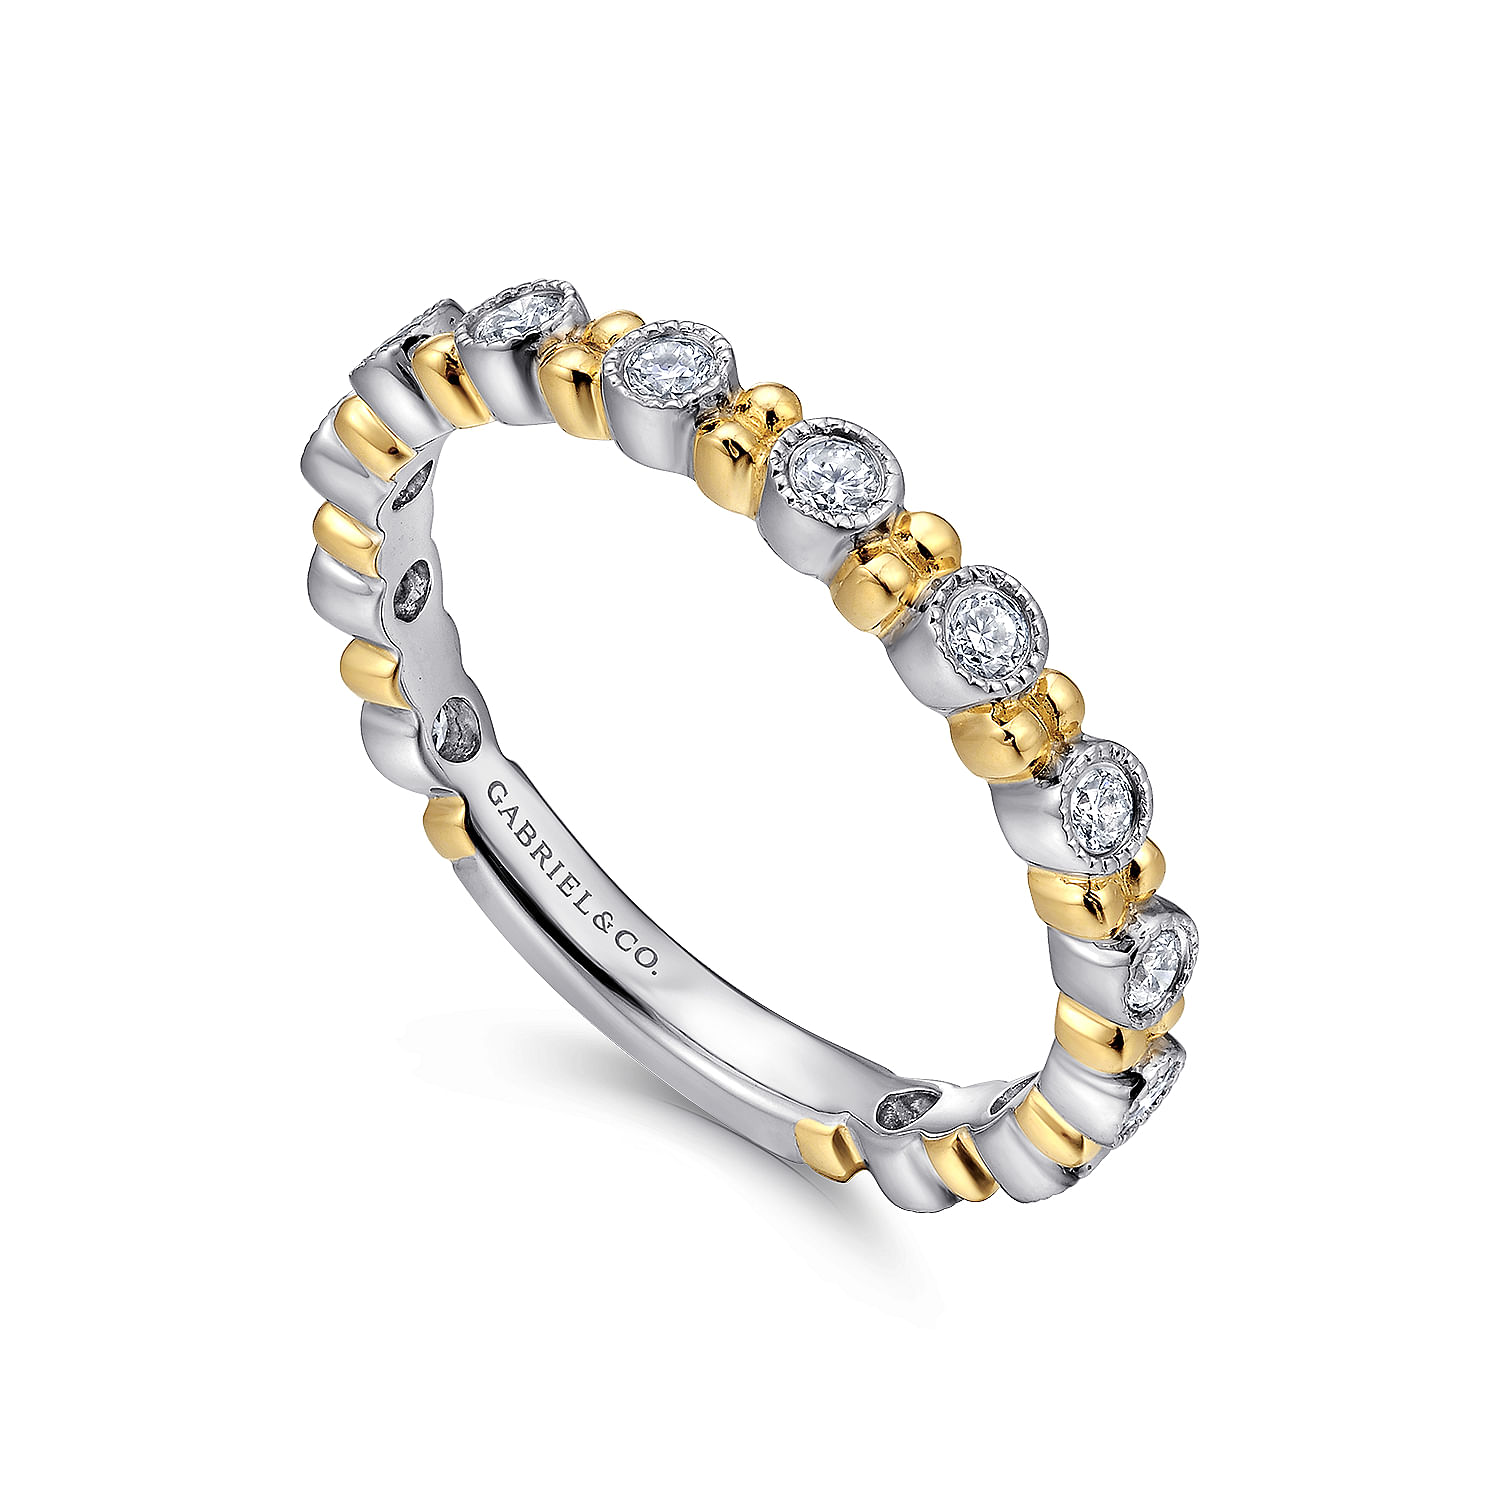 14K-White-Gold-Stackable-Diamond-Ring-with-Yellow-Gold-Bead-Spacers3